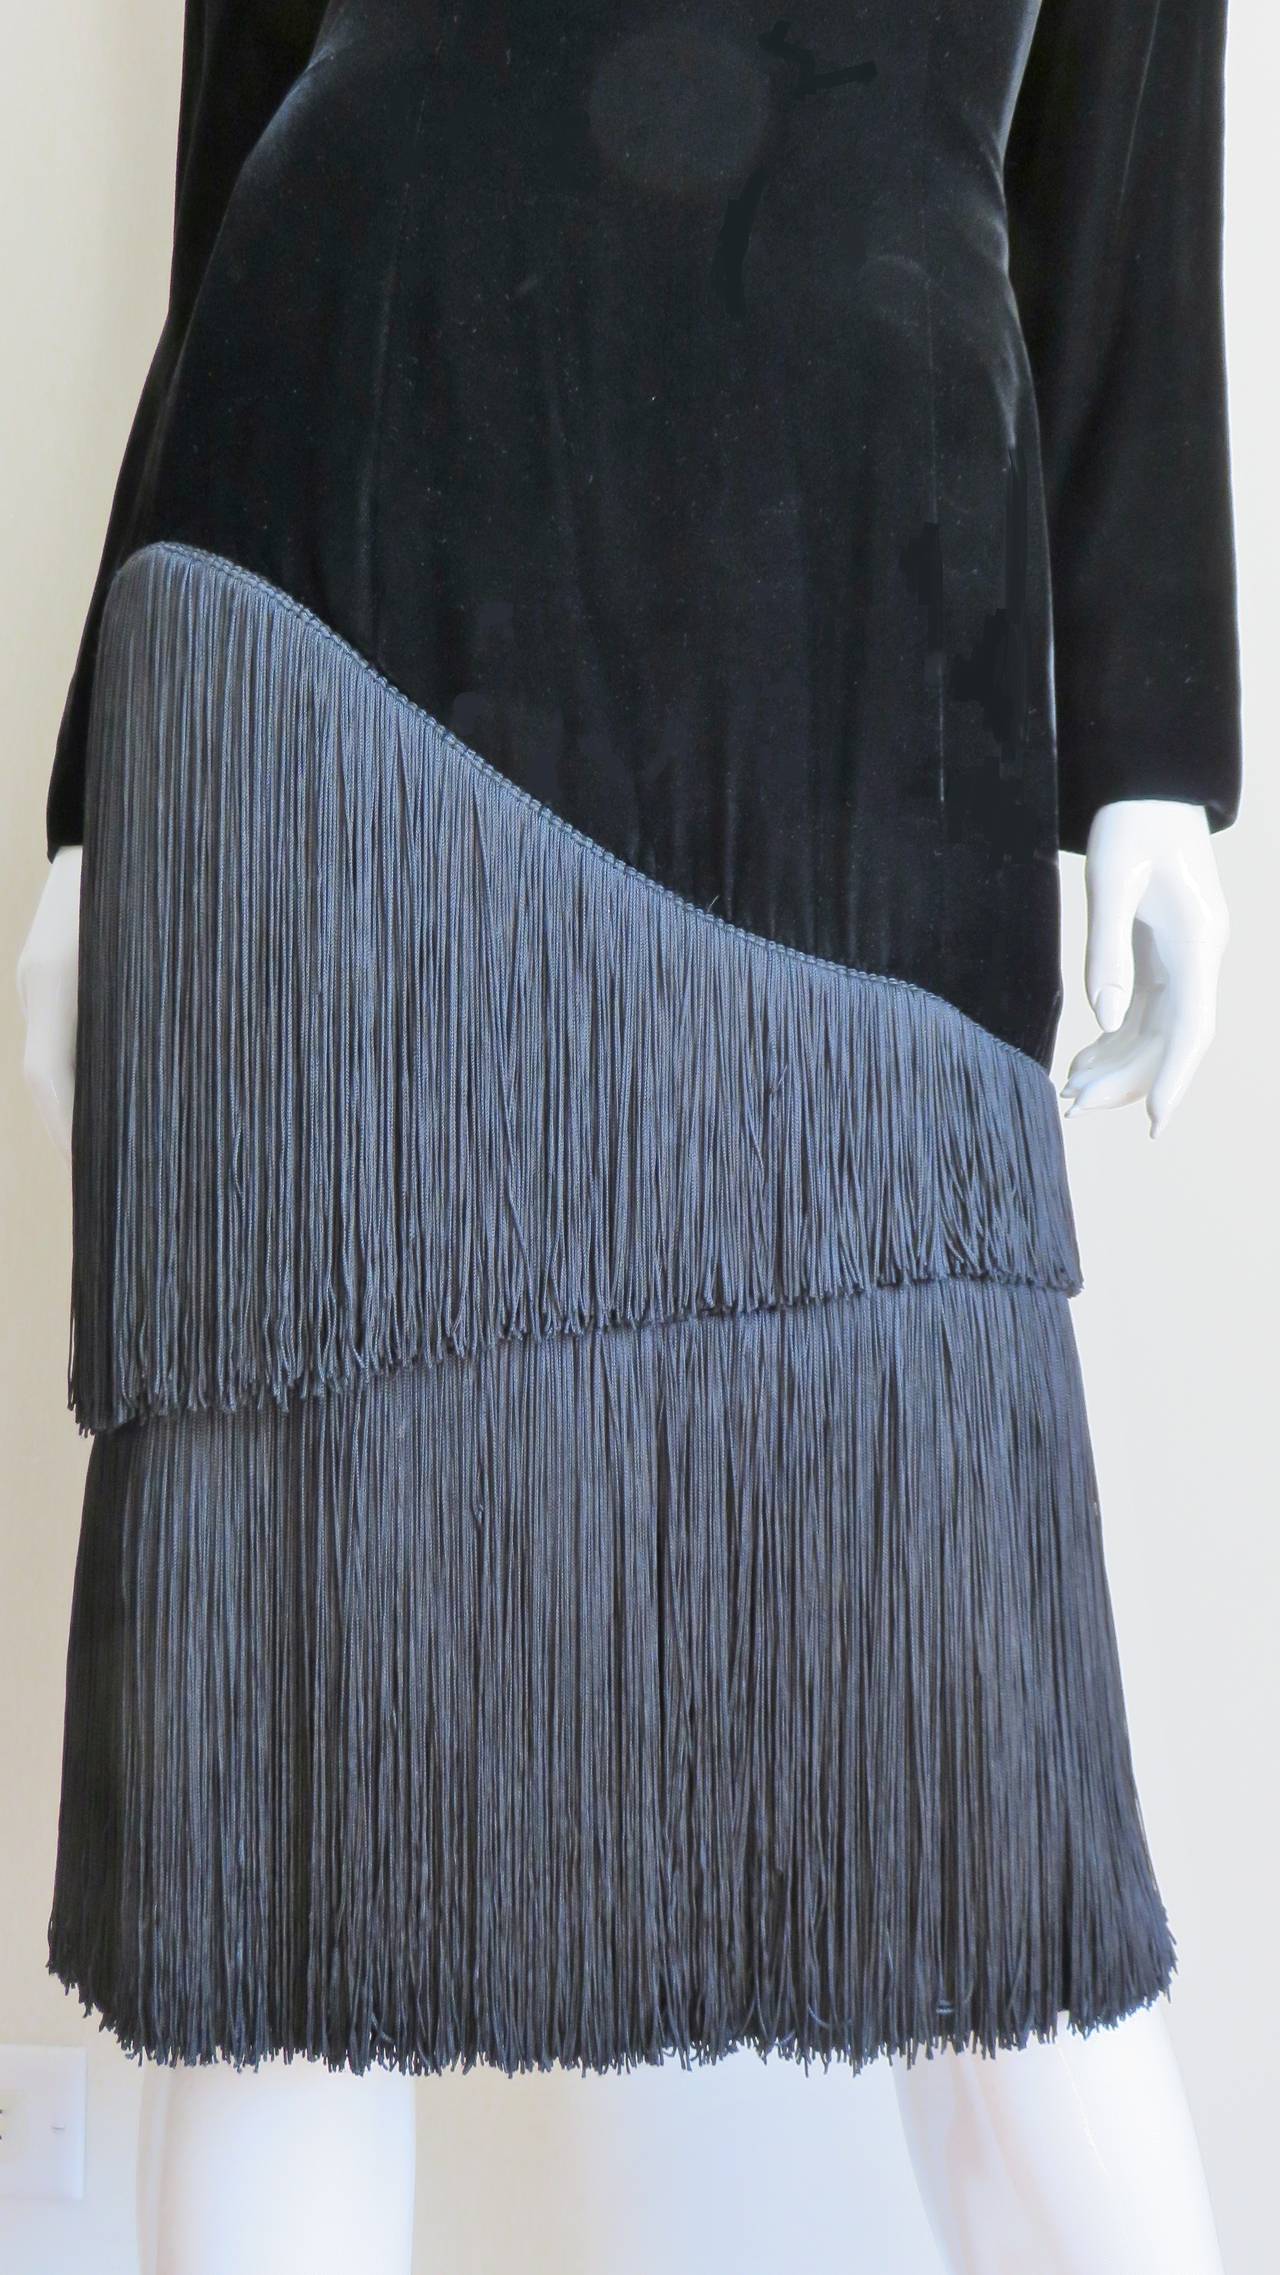  Lanvin Dress with Fringe 1980s In Good Condition For Sale In Water Mill, NY